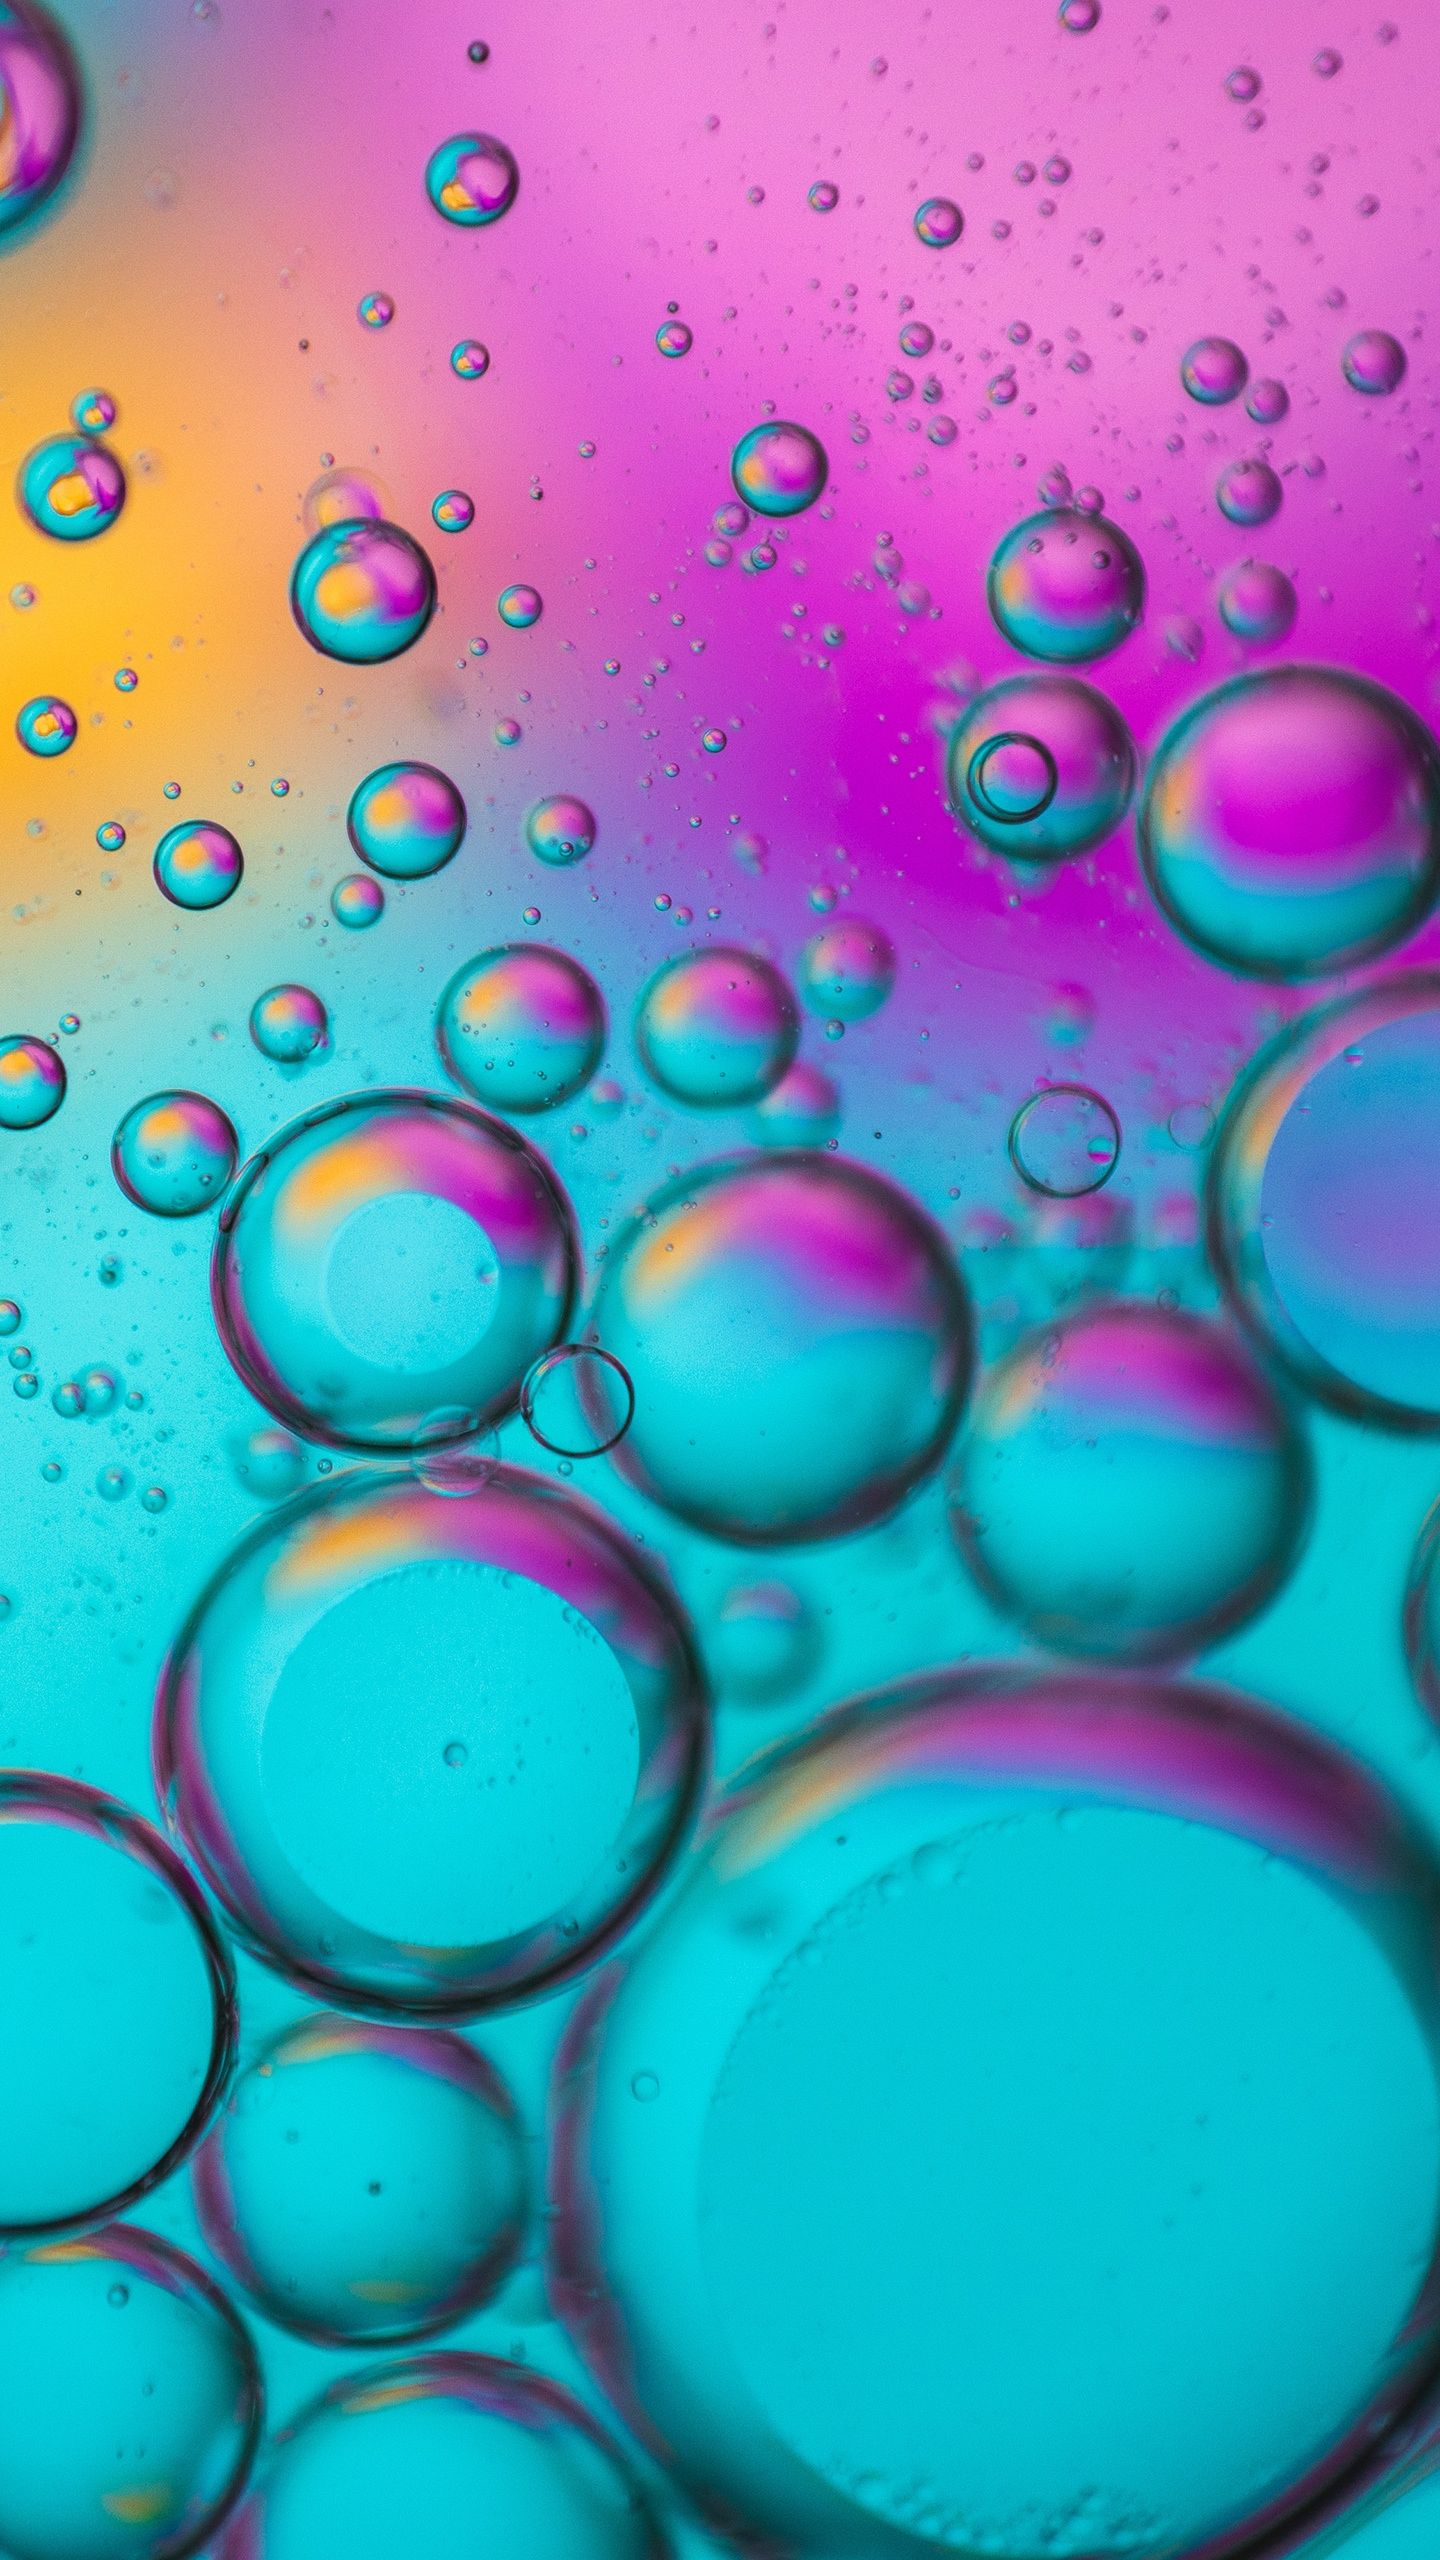 Bubbles Wallpaper 4K, Spectrum, Colorful, Abstract